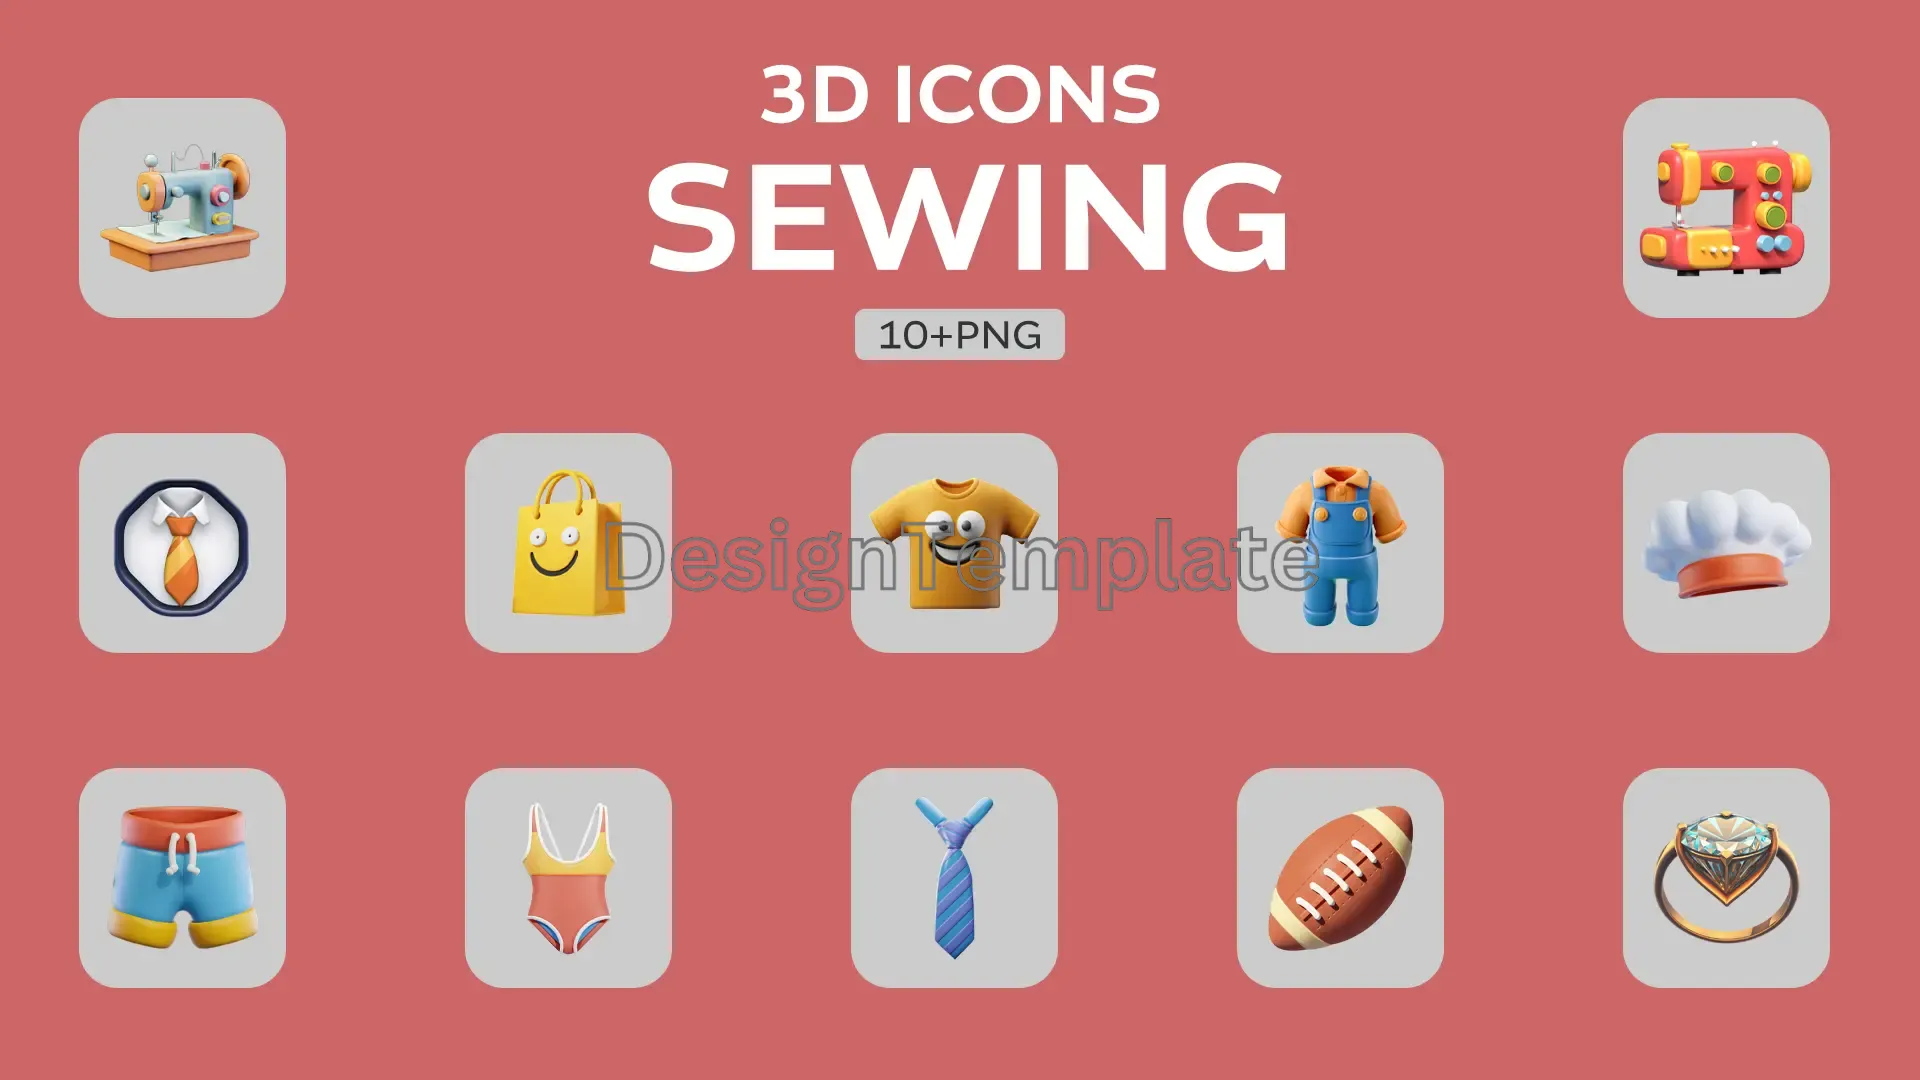 Stitched Styles Sewing 3D Icons Collection